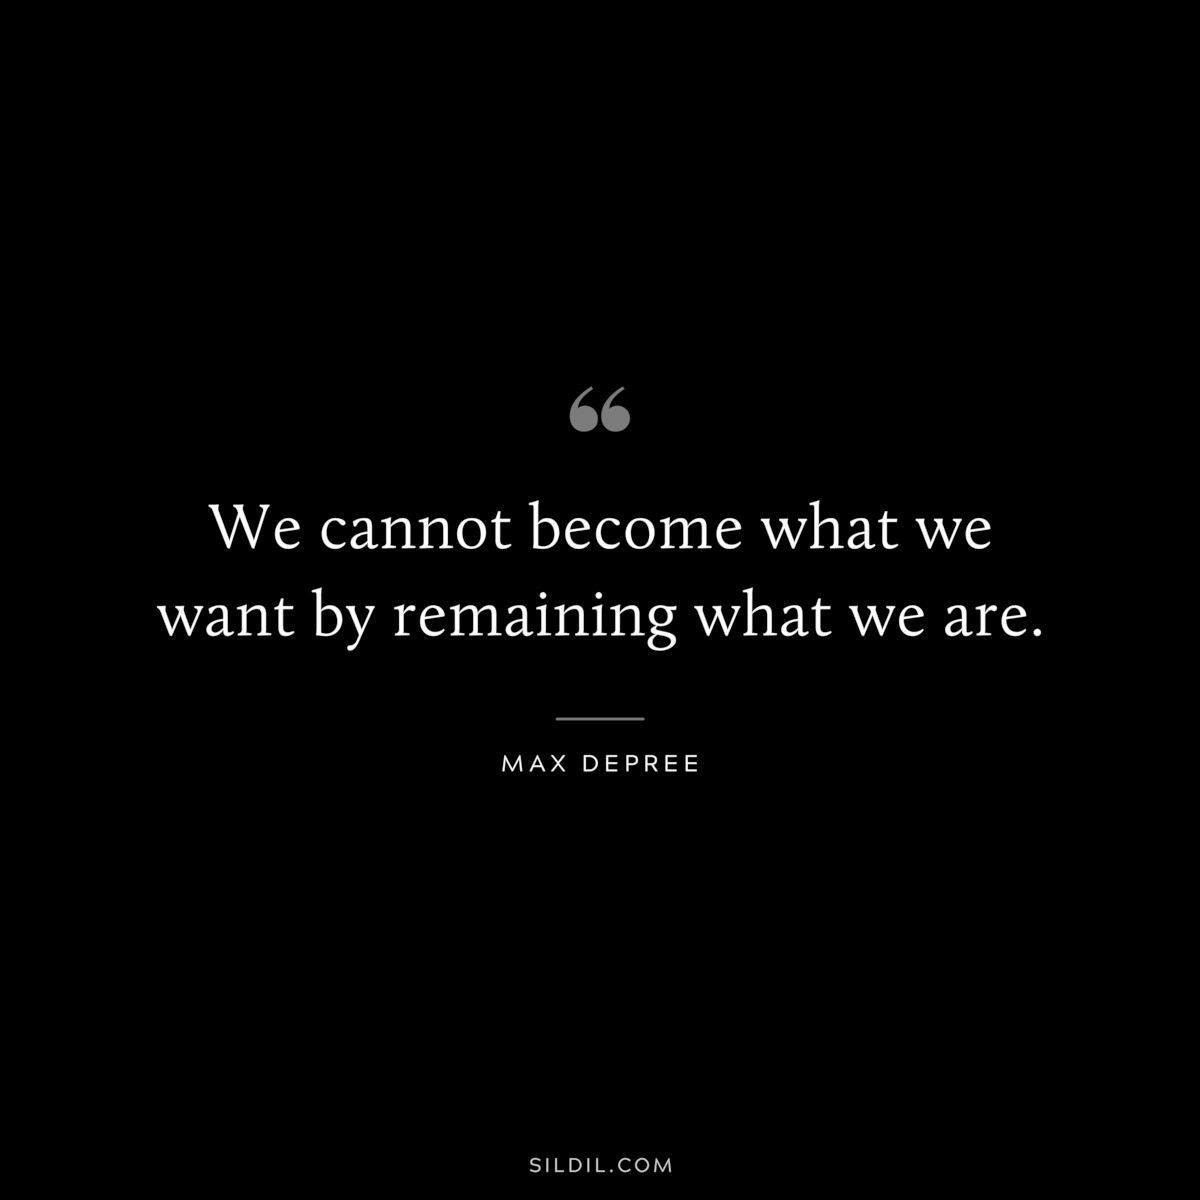 We cannot become what we want by remaining what we are. ― Max Depree